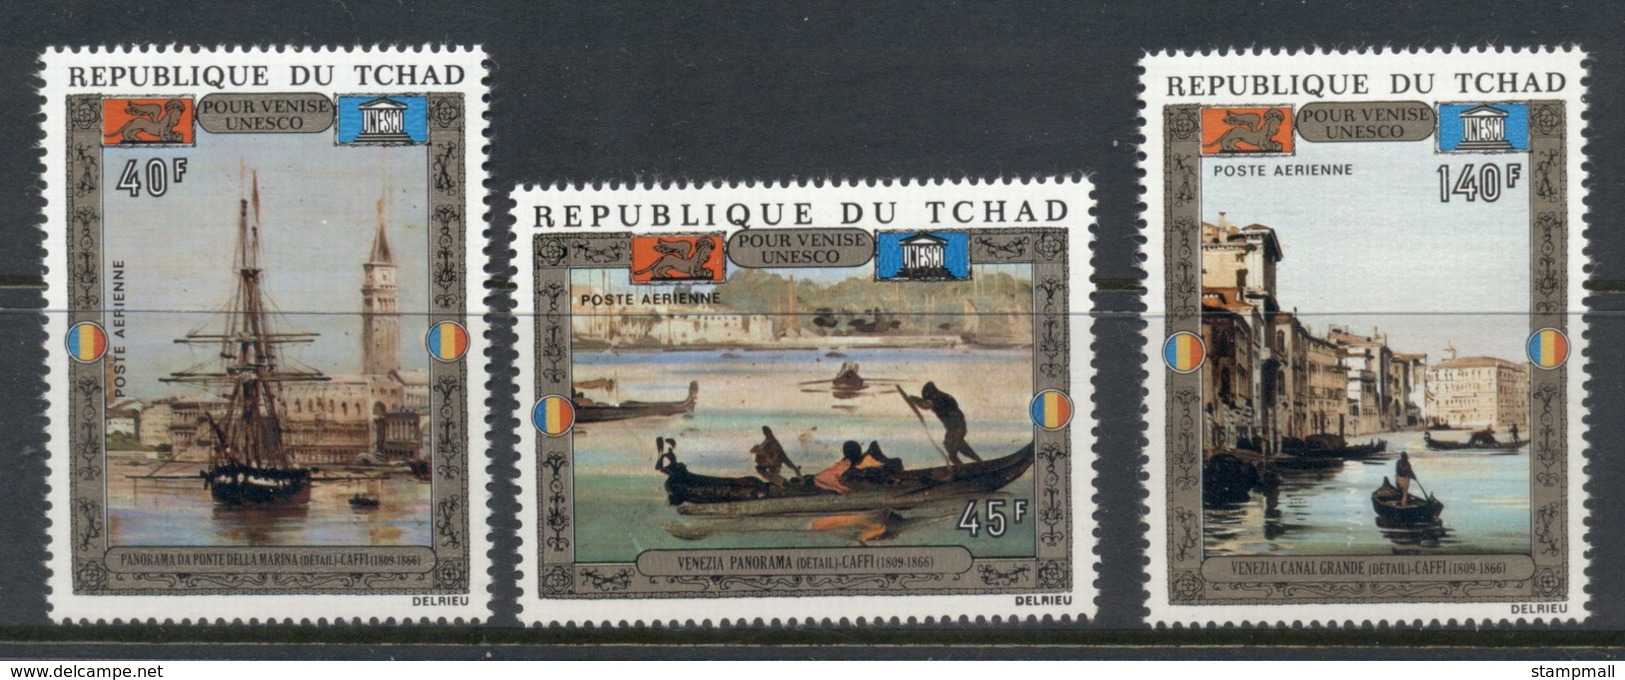 Chad 1972 UNESCO Campaign To Save Monuments Of Venice MUH - Chad (1960-...)